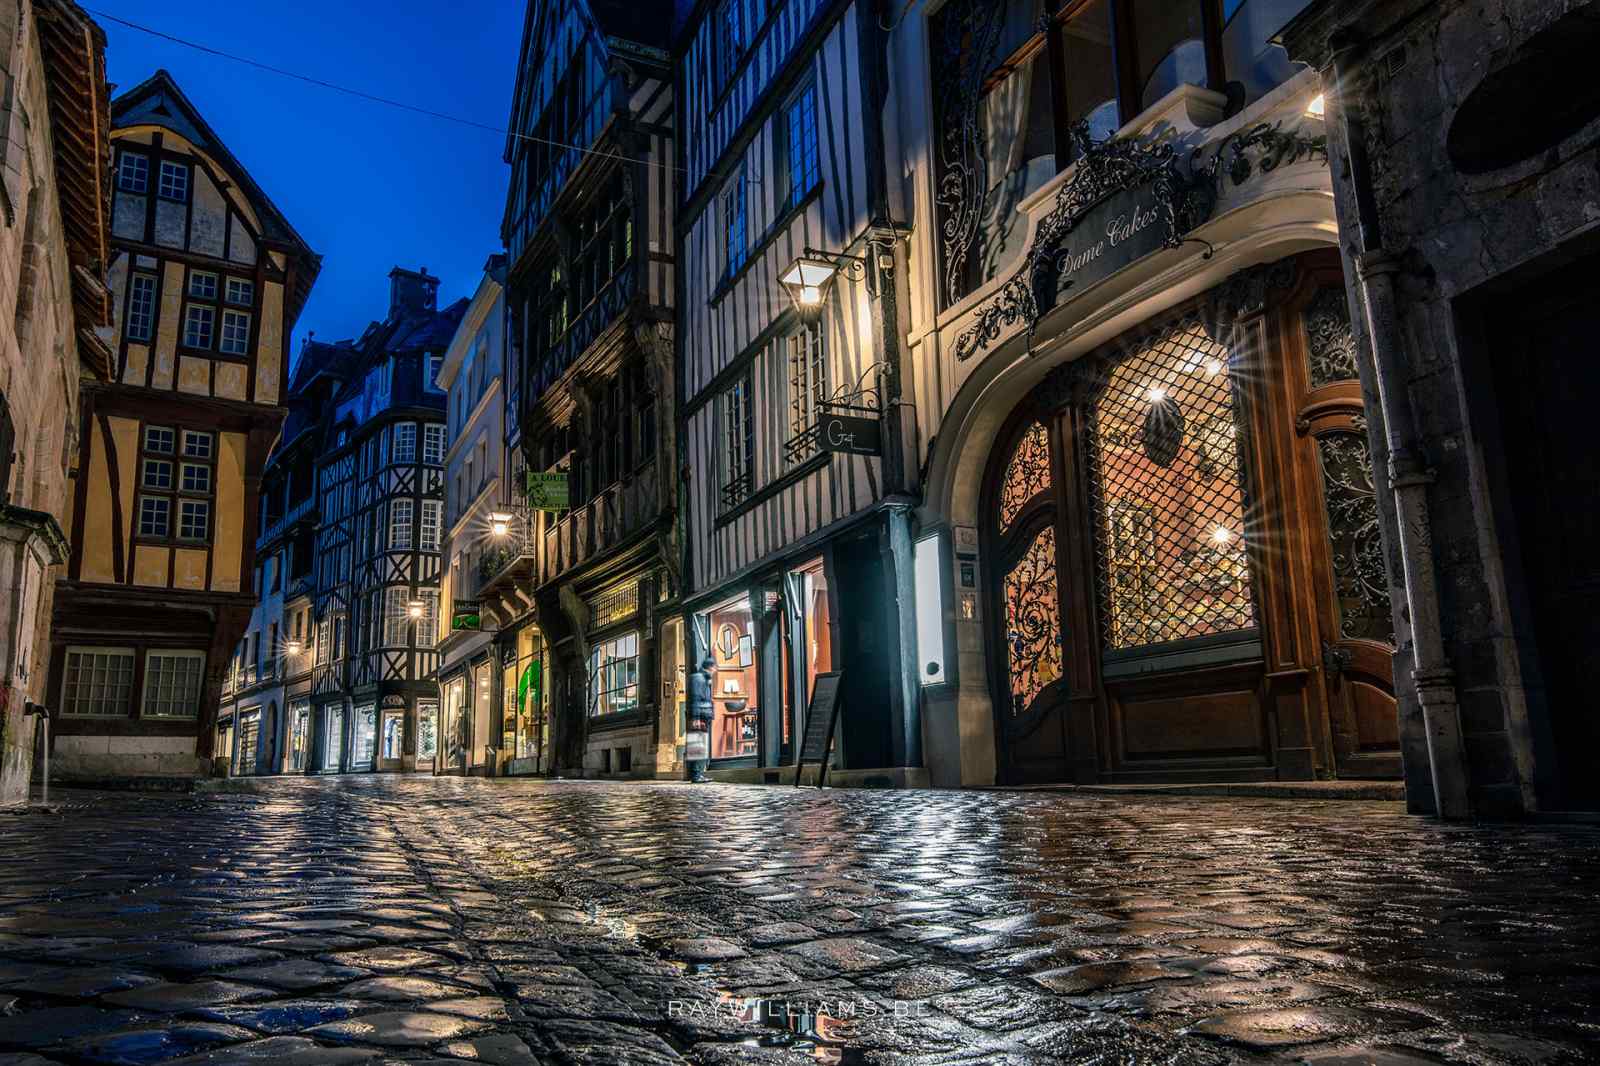 Little streets at night - Rouen (FR)